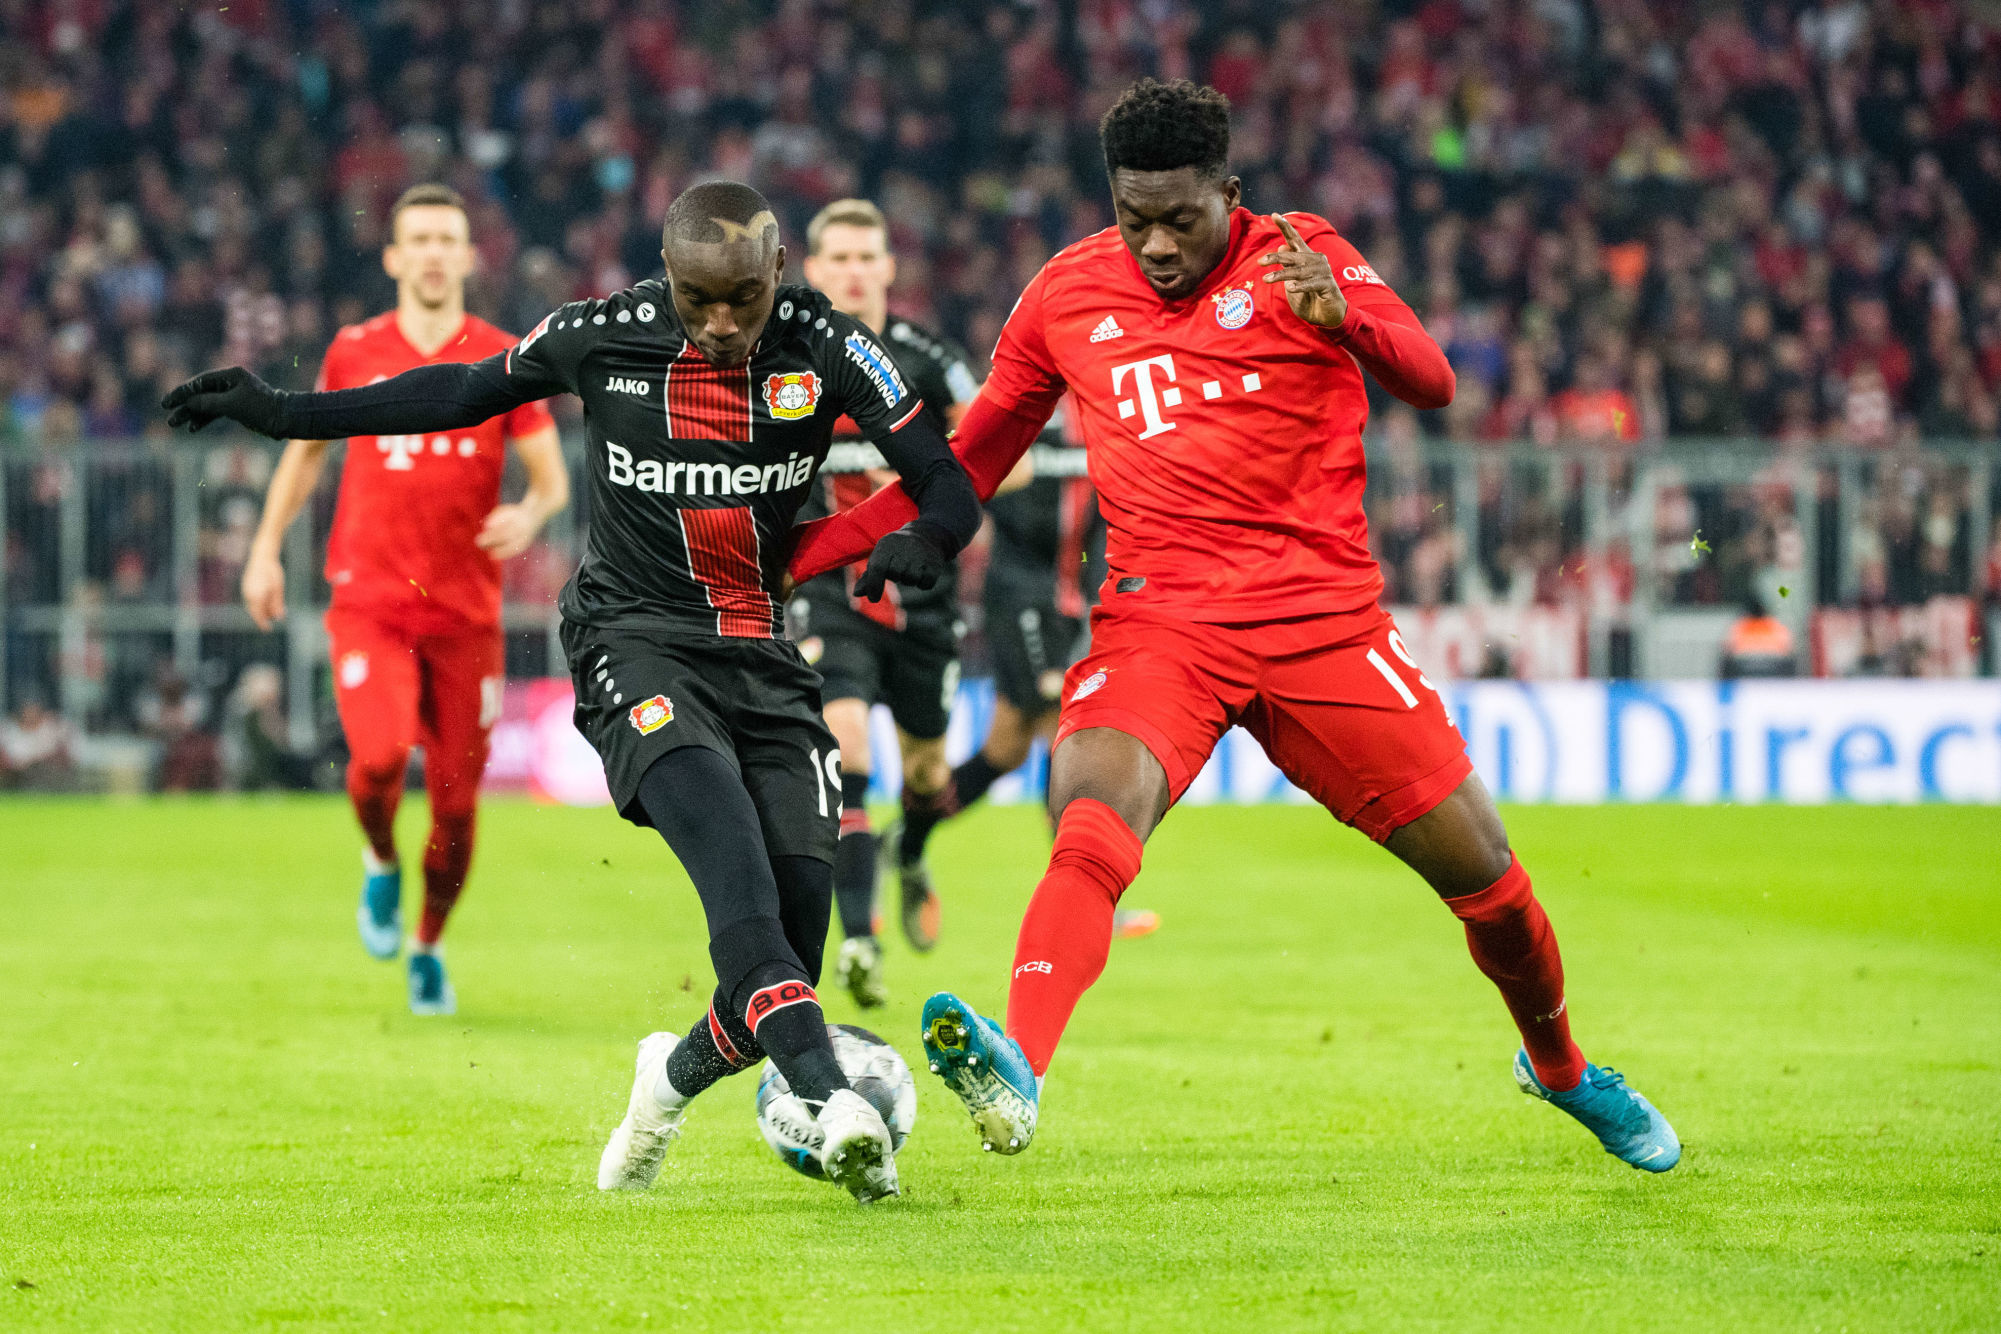 30 November 2019, Bavaria, Munich: Soccer: Bundesliga, Bayern Munich - Bayer Leverkusen, 13th matchday in the Allianz Arena. Moussa Diaby from Leverkusen (l) and Alphonso Davies from FC Bayern Munich in the duel for the ball. Photo: Matthias Balk/dpa - IMPORTANT NOTE: In accordance with the requirements of the DFL Deutsche Fu?ball Liga or the DFB Deutscher Fu?ball-Bund, it is prohibited to use or have used photographs taken in the stadium and/or the match in the form of sequence images and/or video-like photo sequences. 

Photo by Icon Sport - Allianz Arena - Munich (Allemagne)